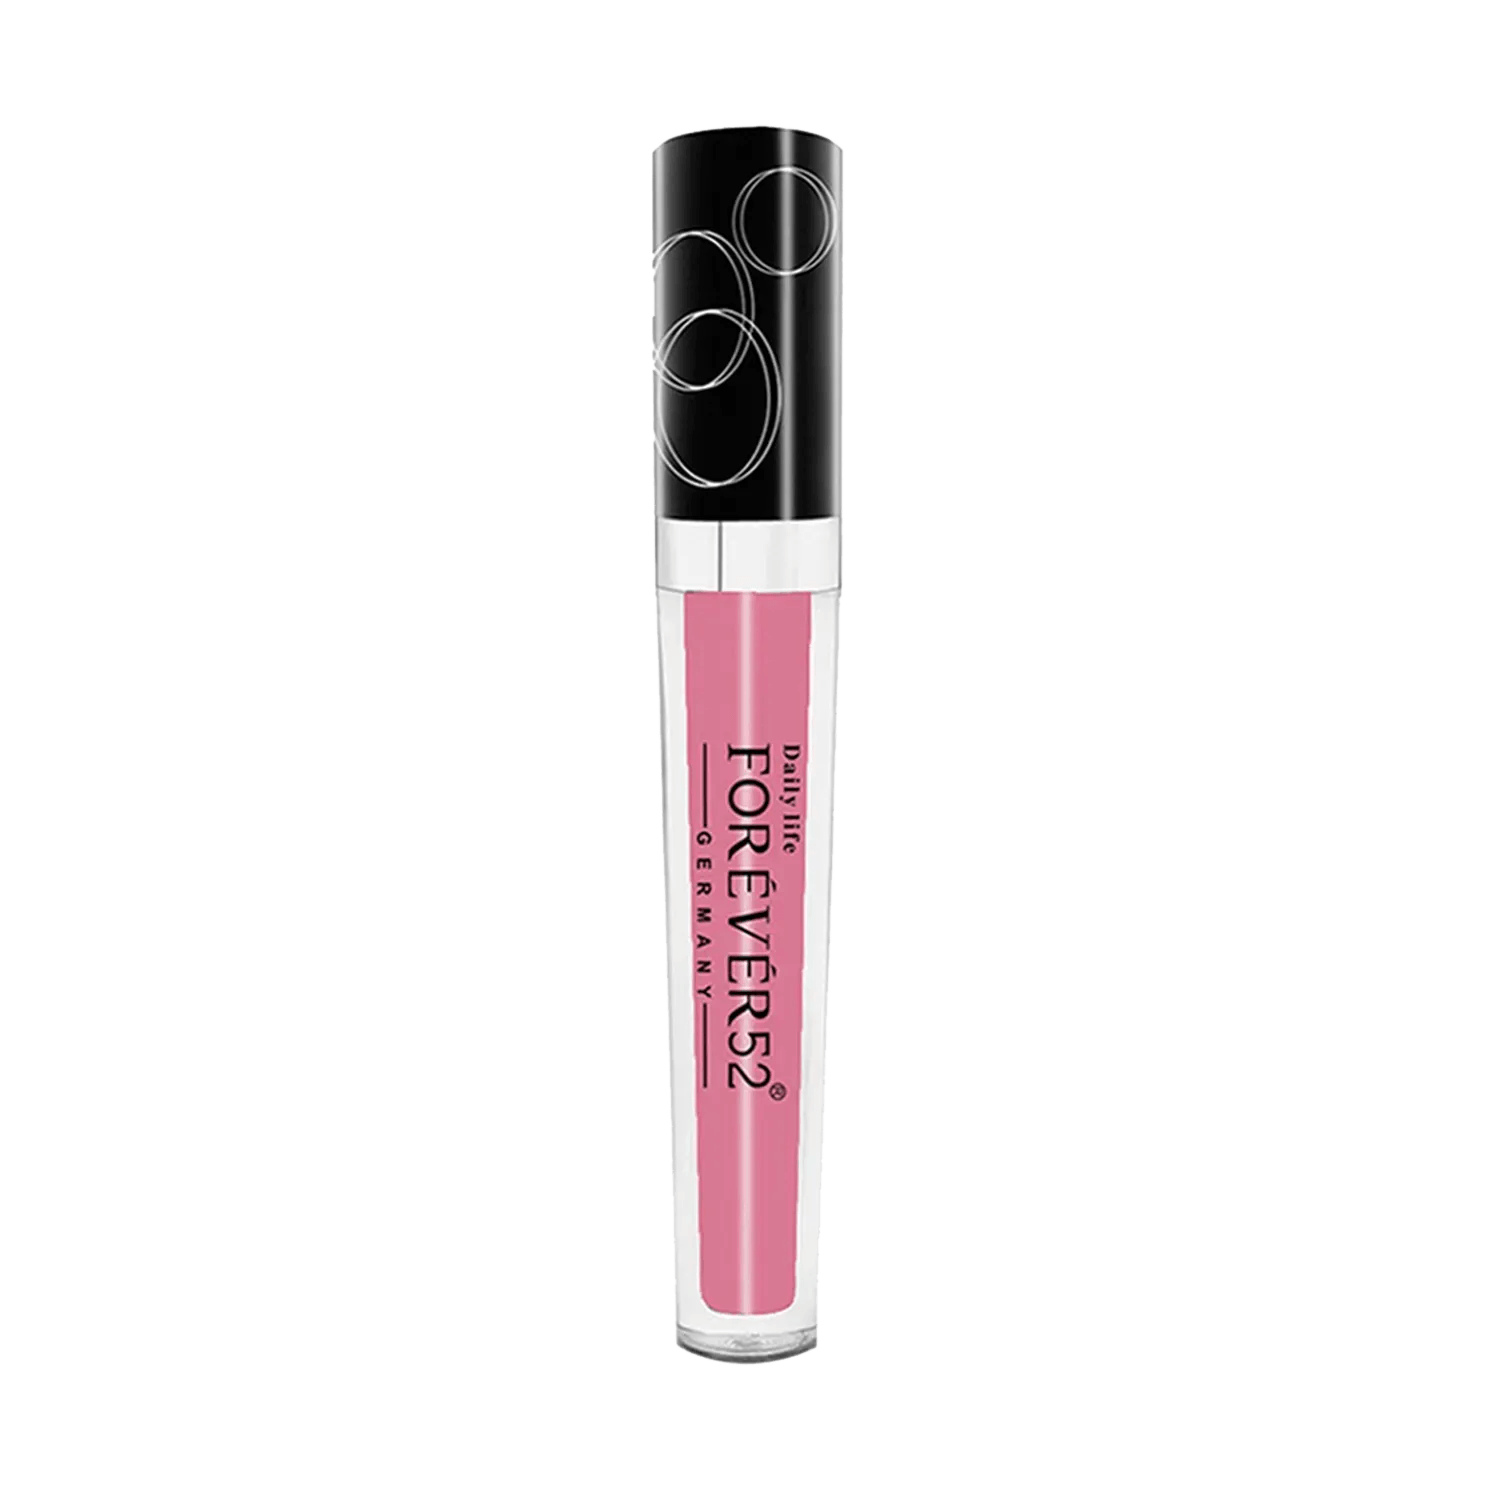 Daily Life Forever52 | Daily Life Forever52 Lip Paint FM0709 (8gm)